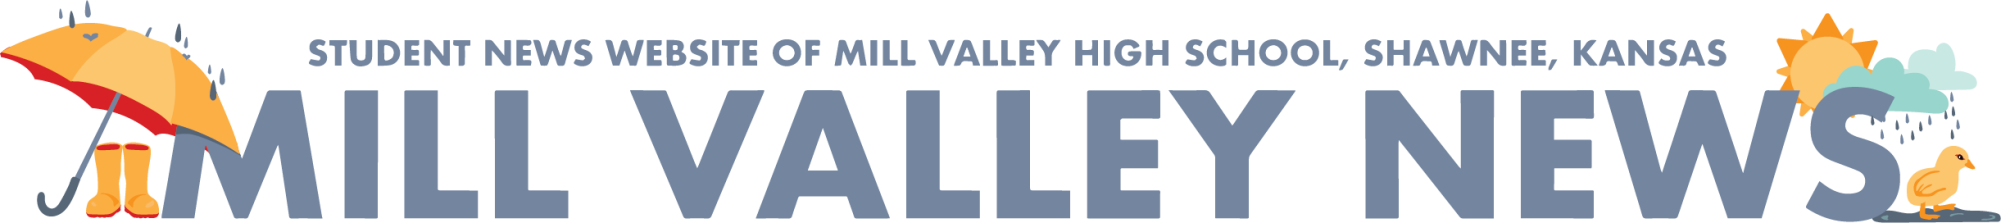 The student news site of Mill Valley High School